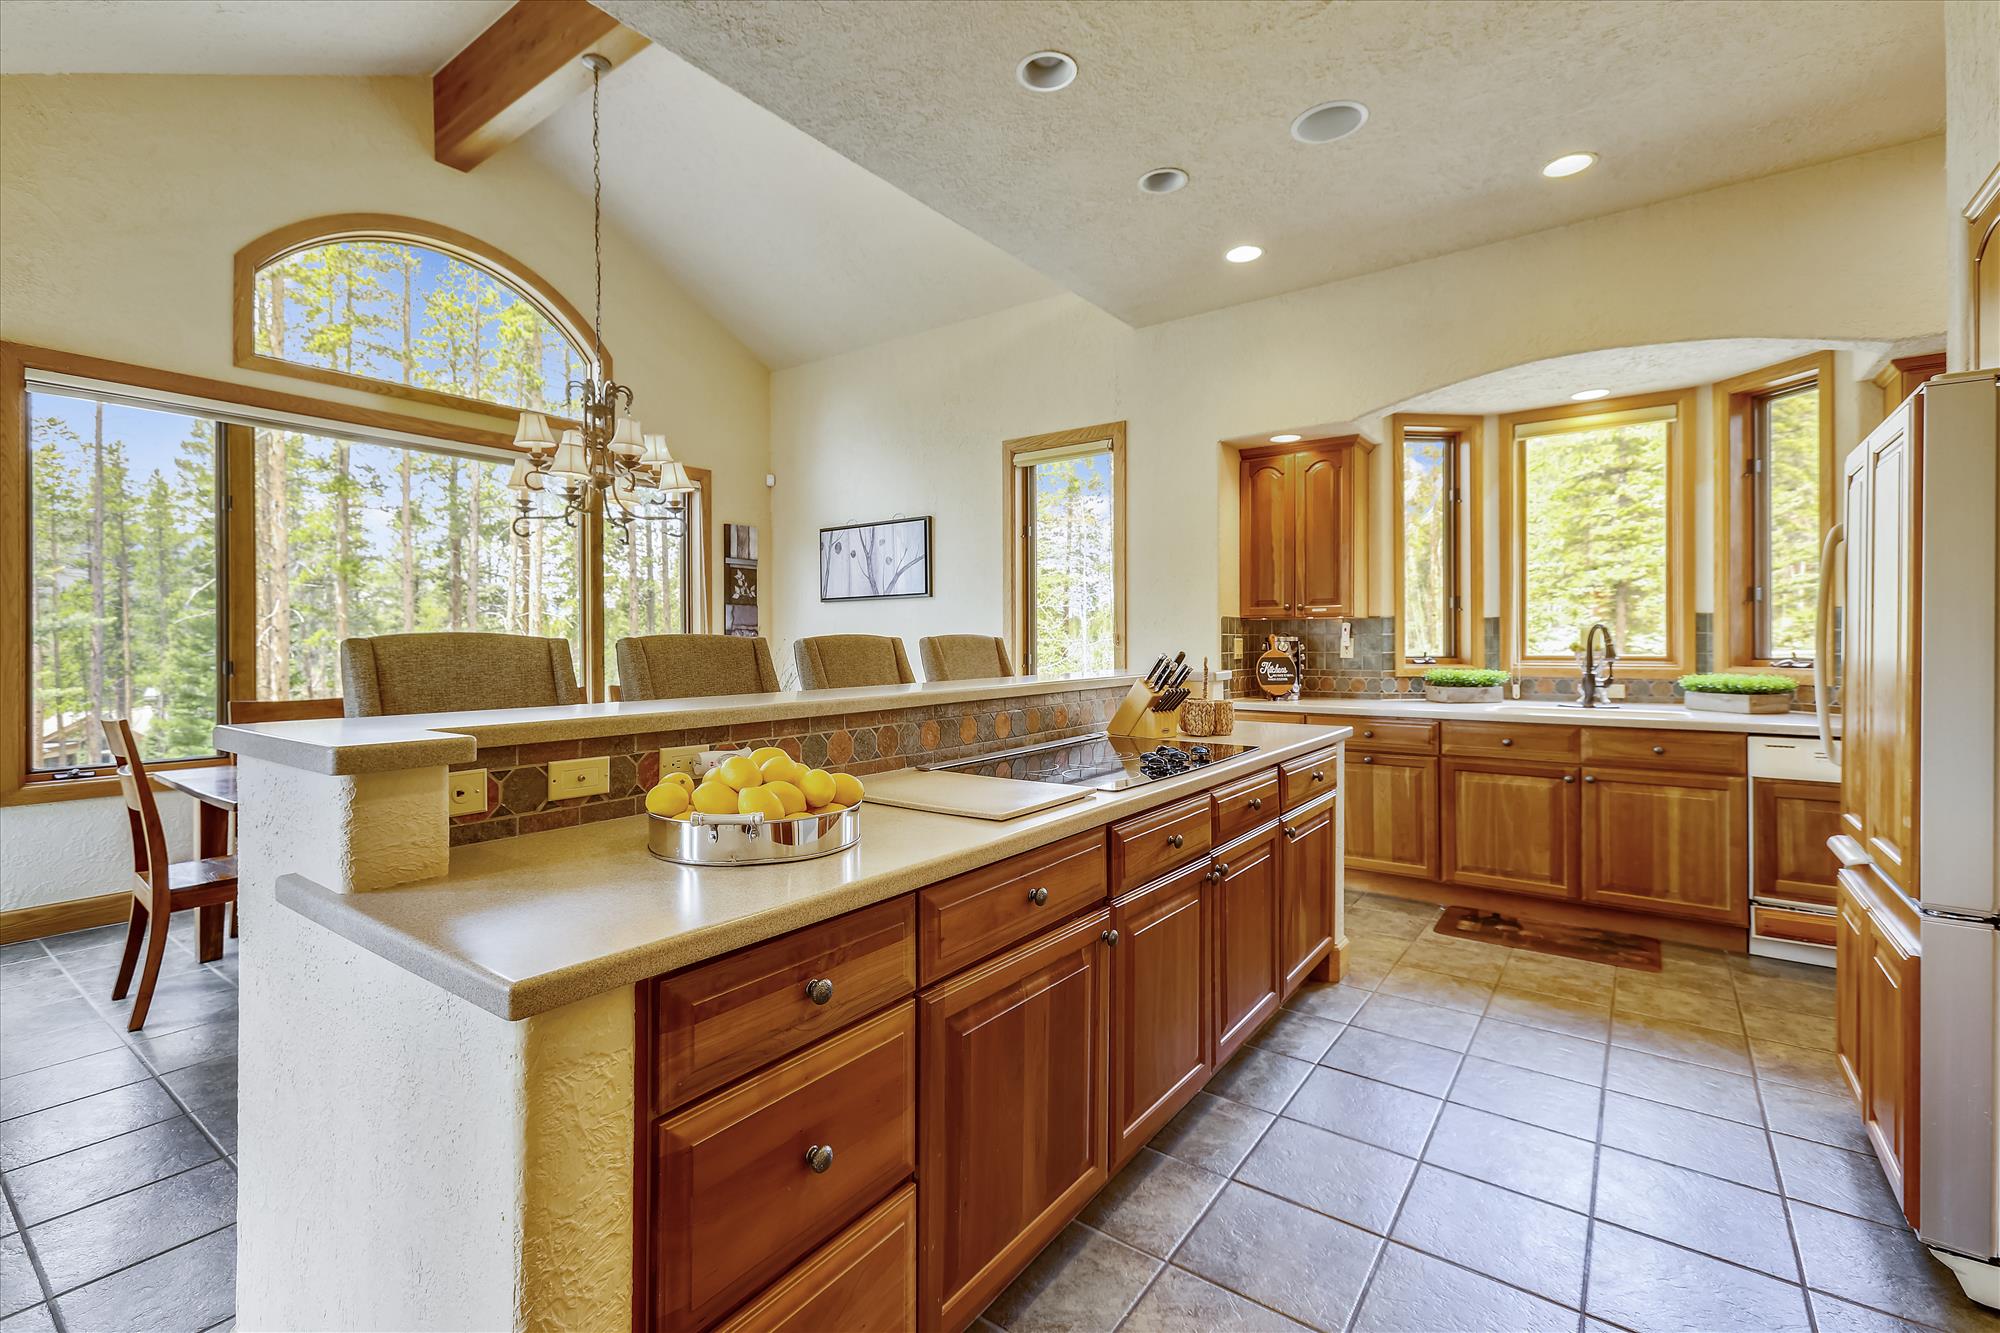 This kitchen boasts ample seating space and updated appliances for all of your cooking needs - Evergreen Lodge Breckenridge Vacation Rental